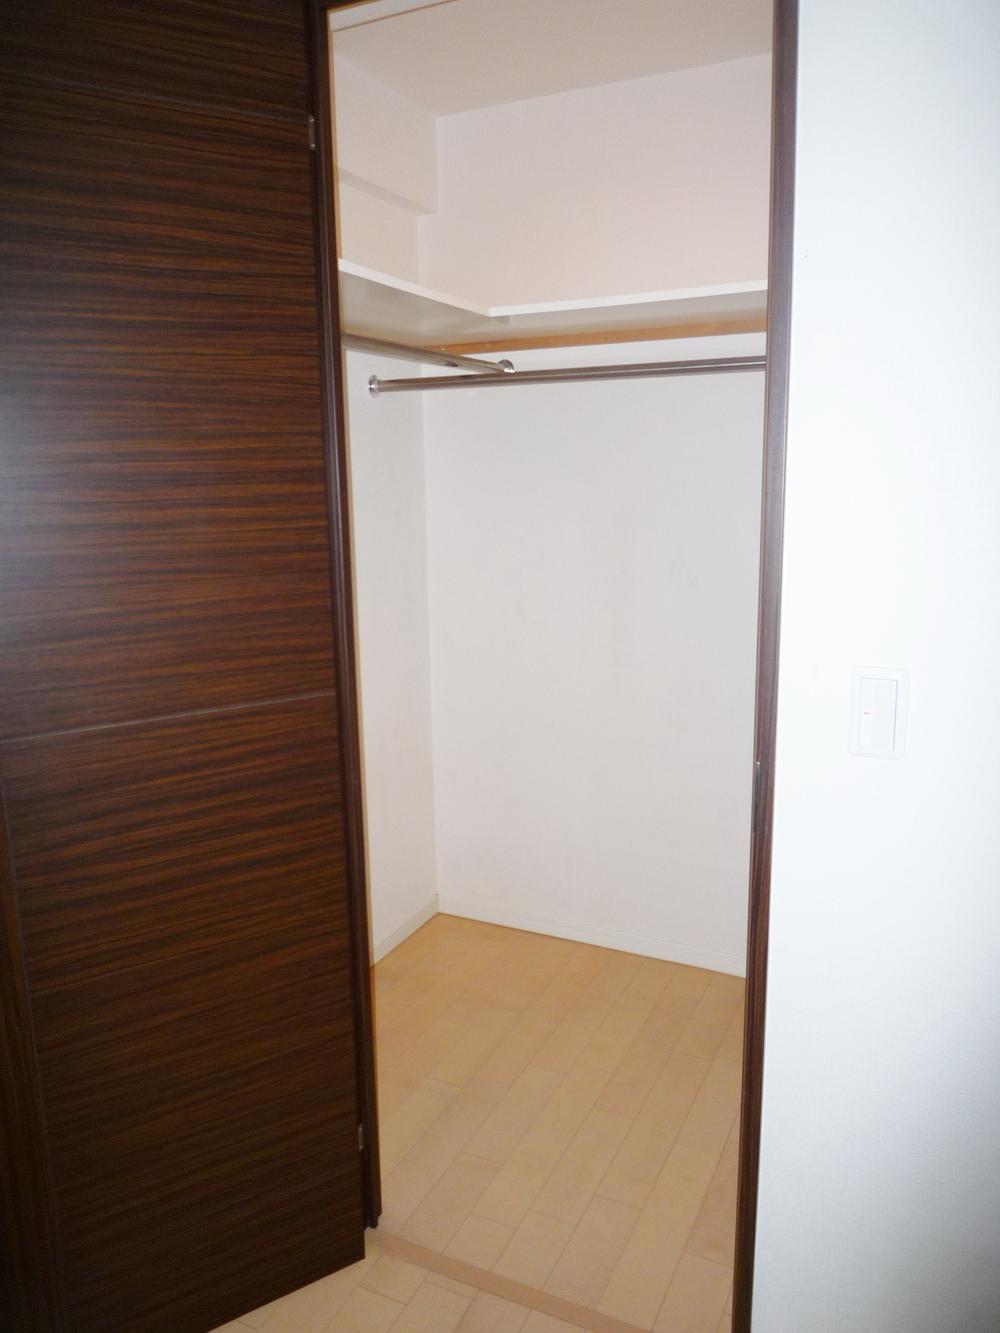 Receipt. Walk-in closet is. It is also safe in the large home of your luggage.